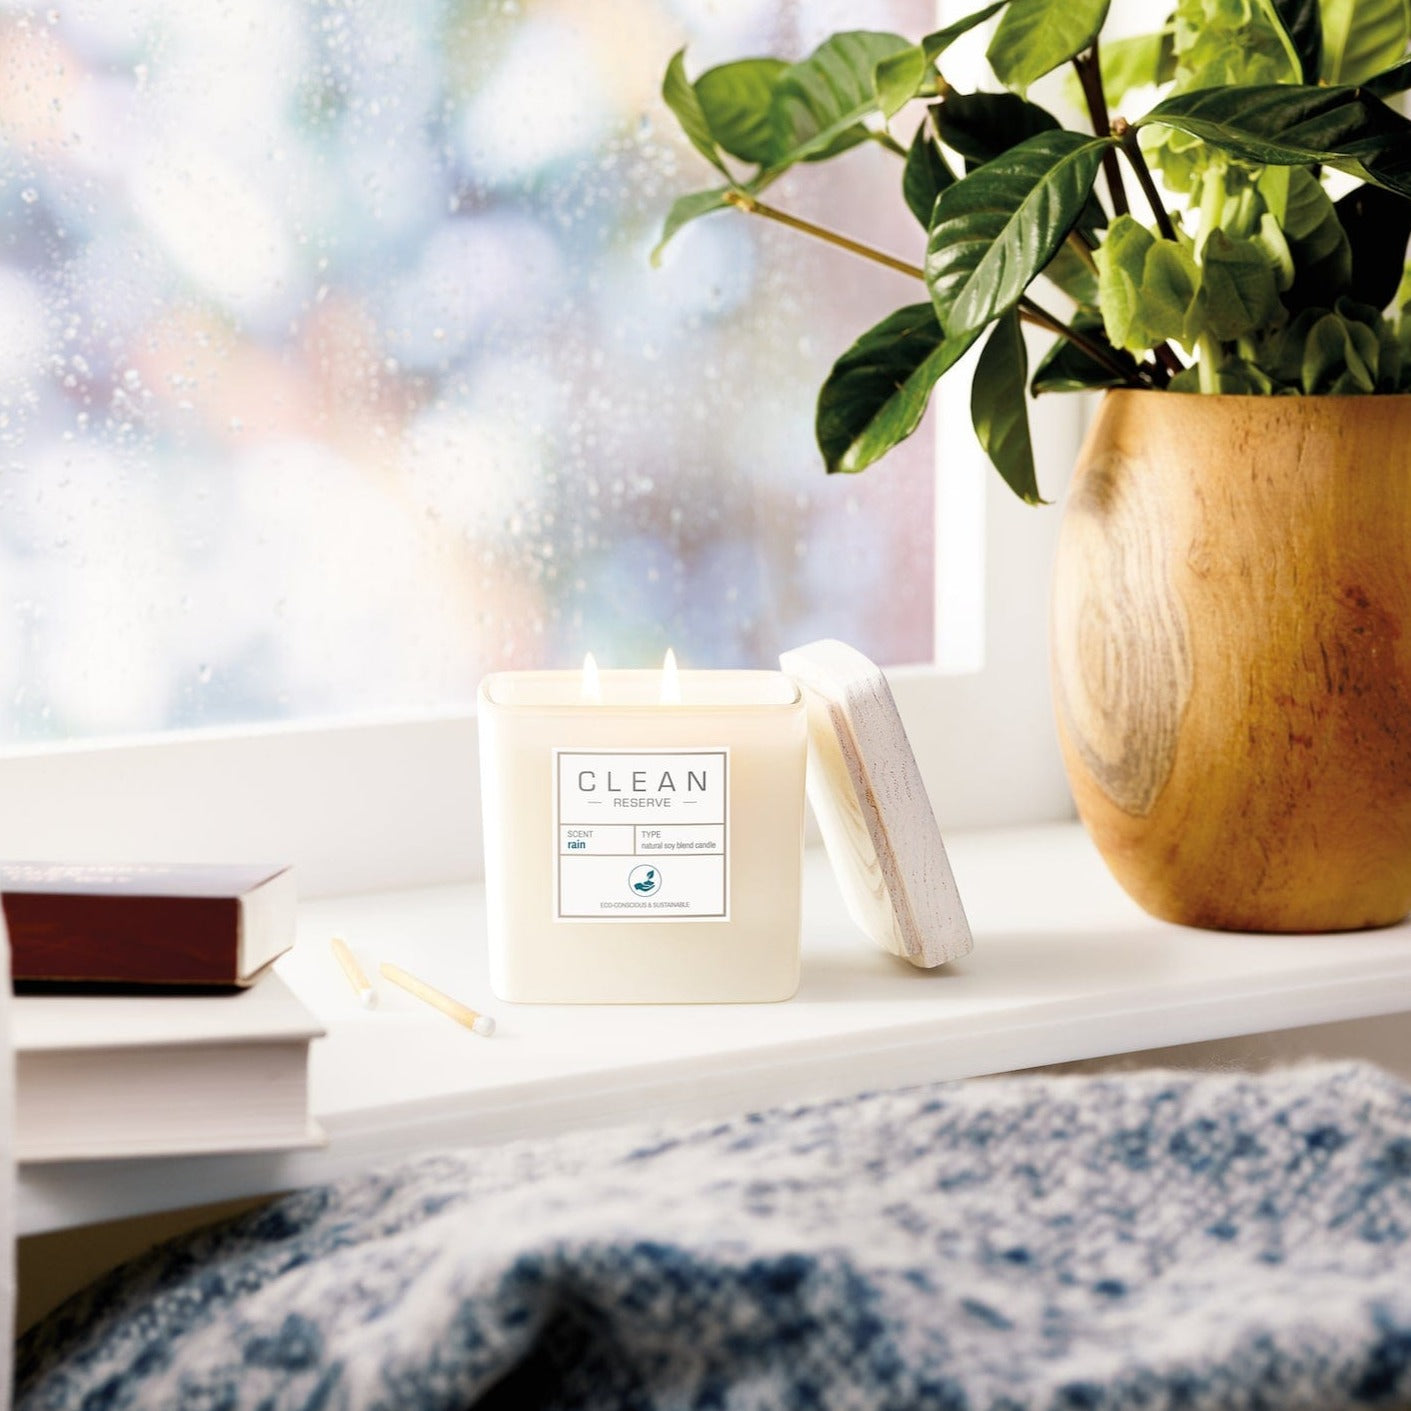 Clean Reserve Rain Natural Soy Blend Candle in window